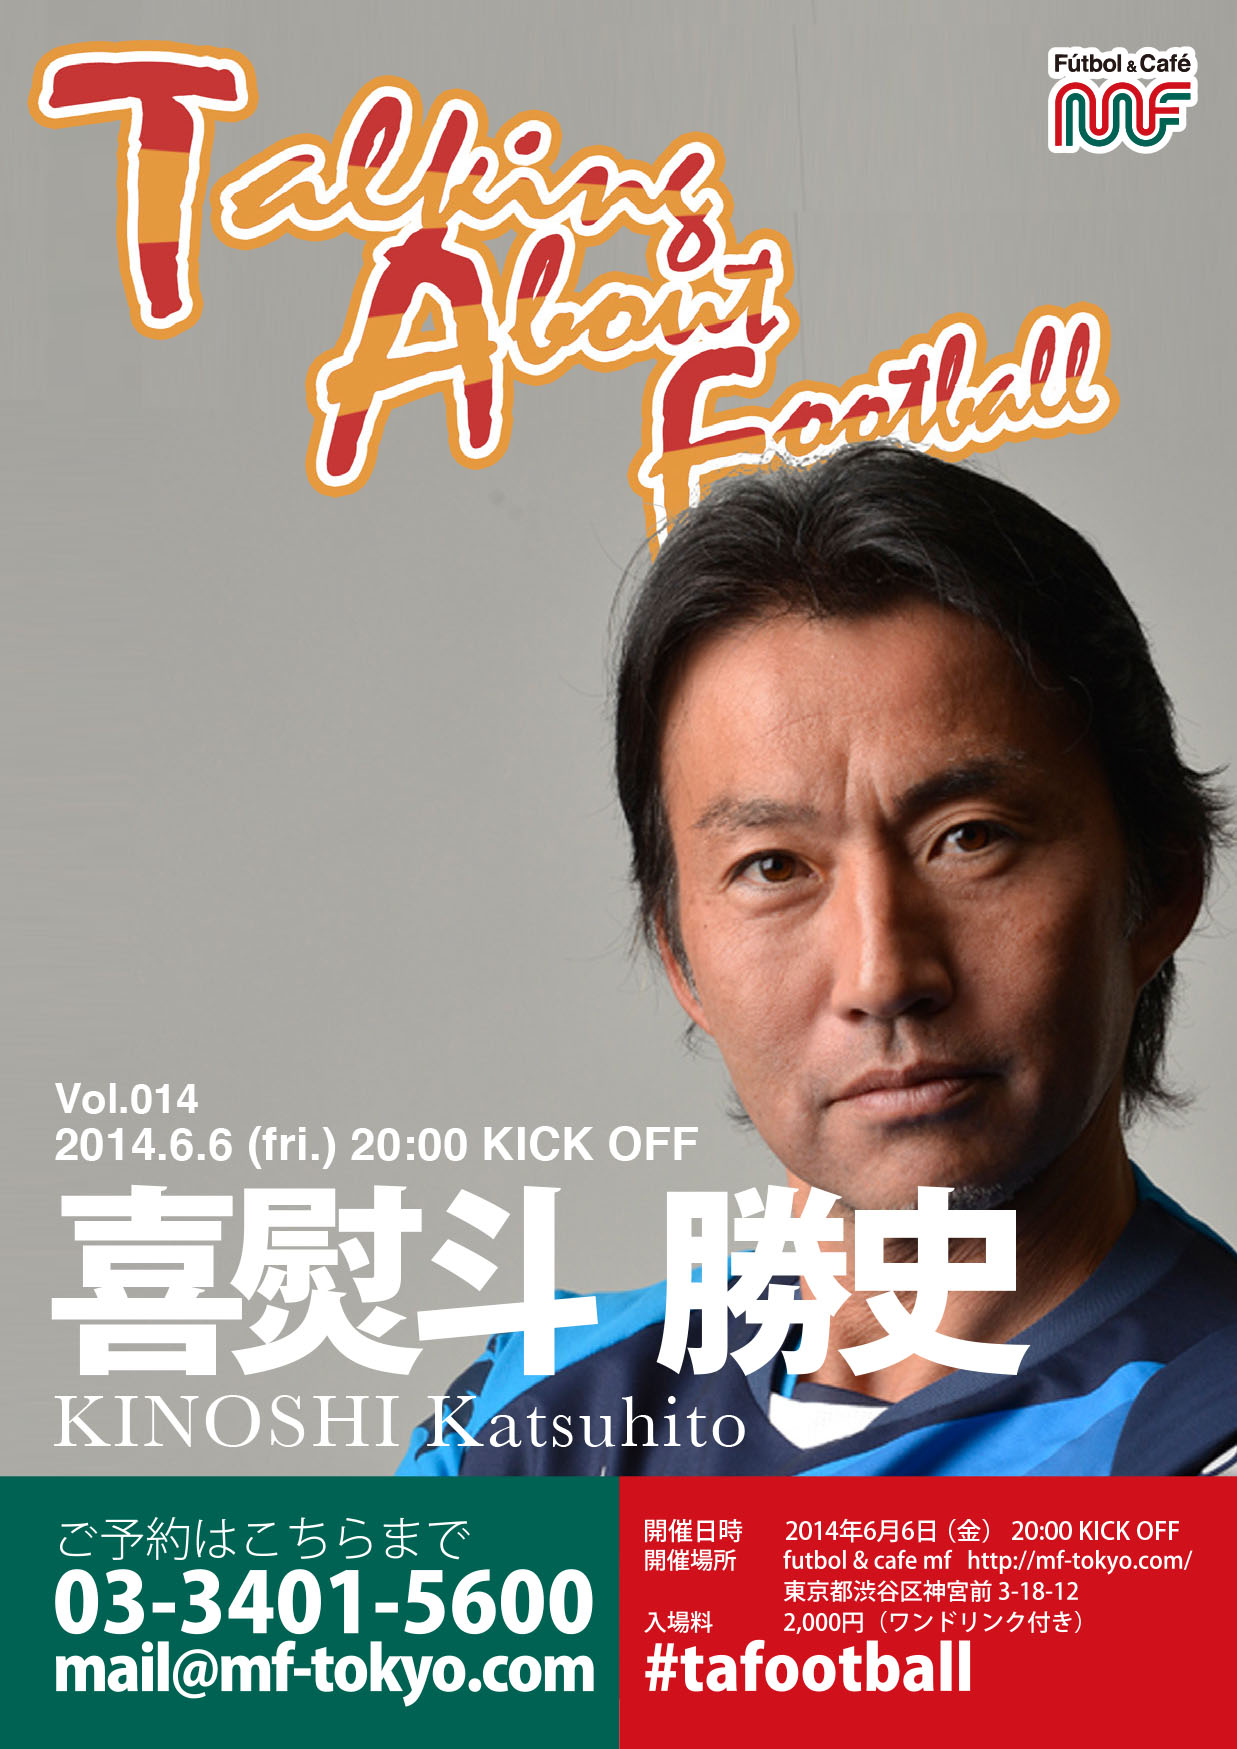 Www Soccer King Jp Sk Blog Article 4703 Html 14 06 23t 04 38 09 00 Yearly 0 4 Www Soccer King Jp Wp Content Uploads 14 06 Sakurajima Jpg Www Soccer King Jp Sk Blog Article 3239 Html 14 06 23t17 24 11 09